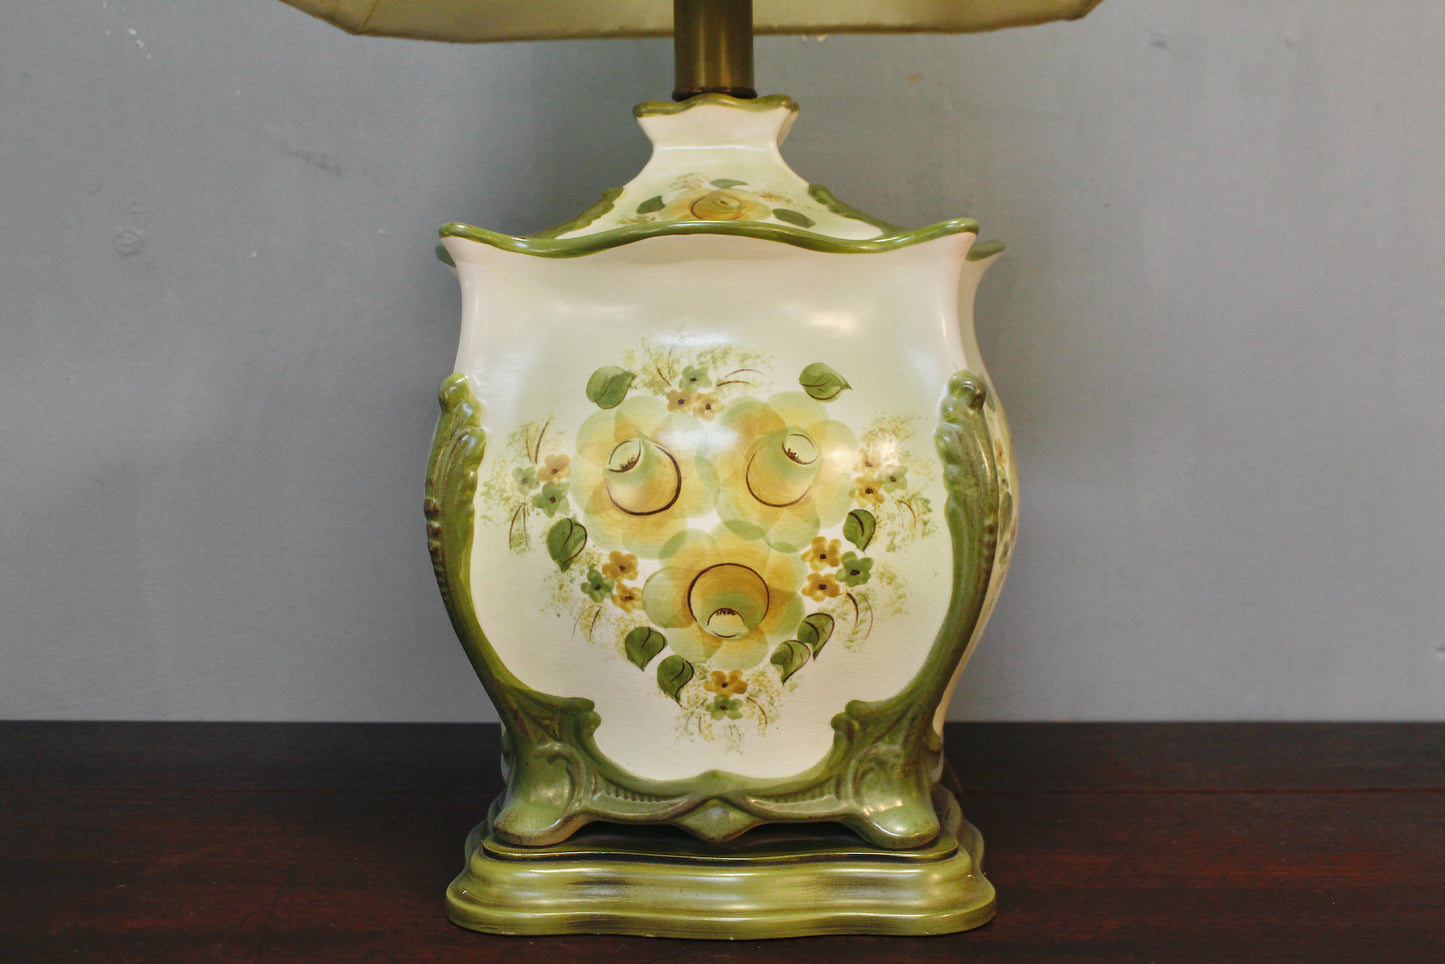 Ceramic Hand-Painted Floral Table Lamp